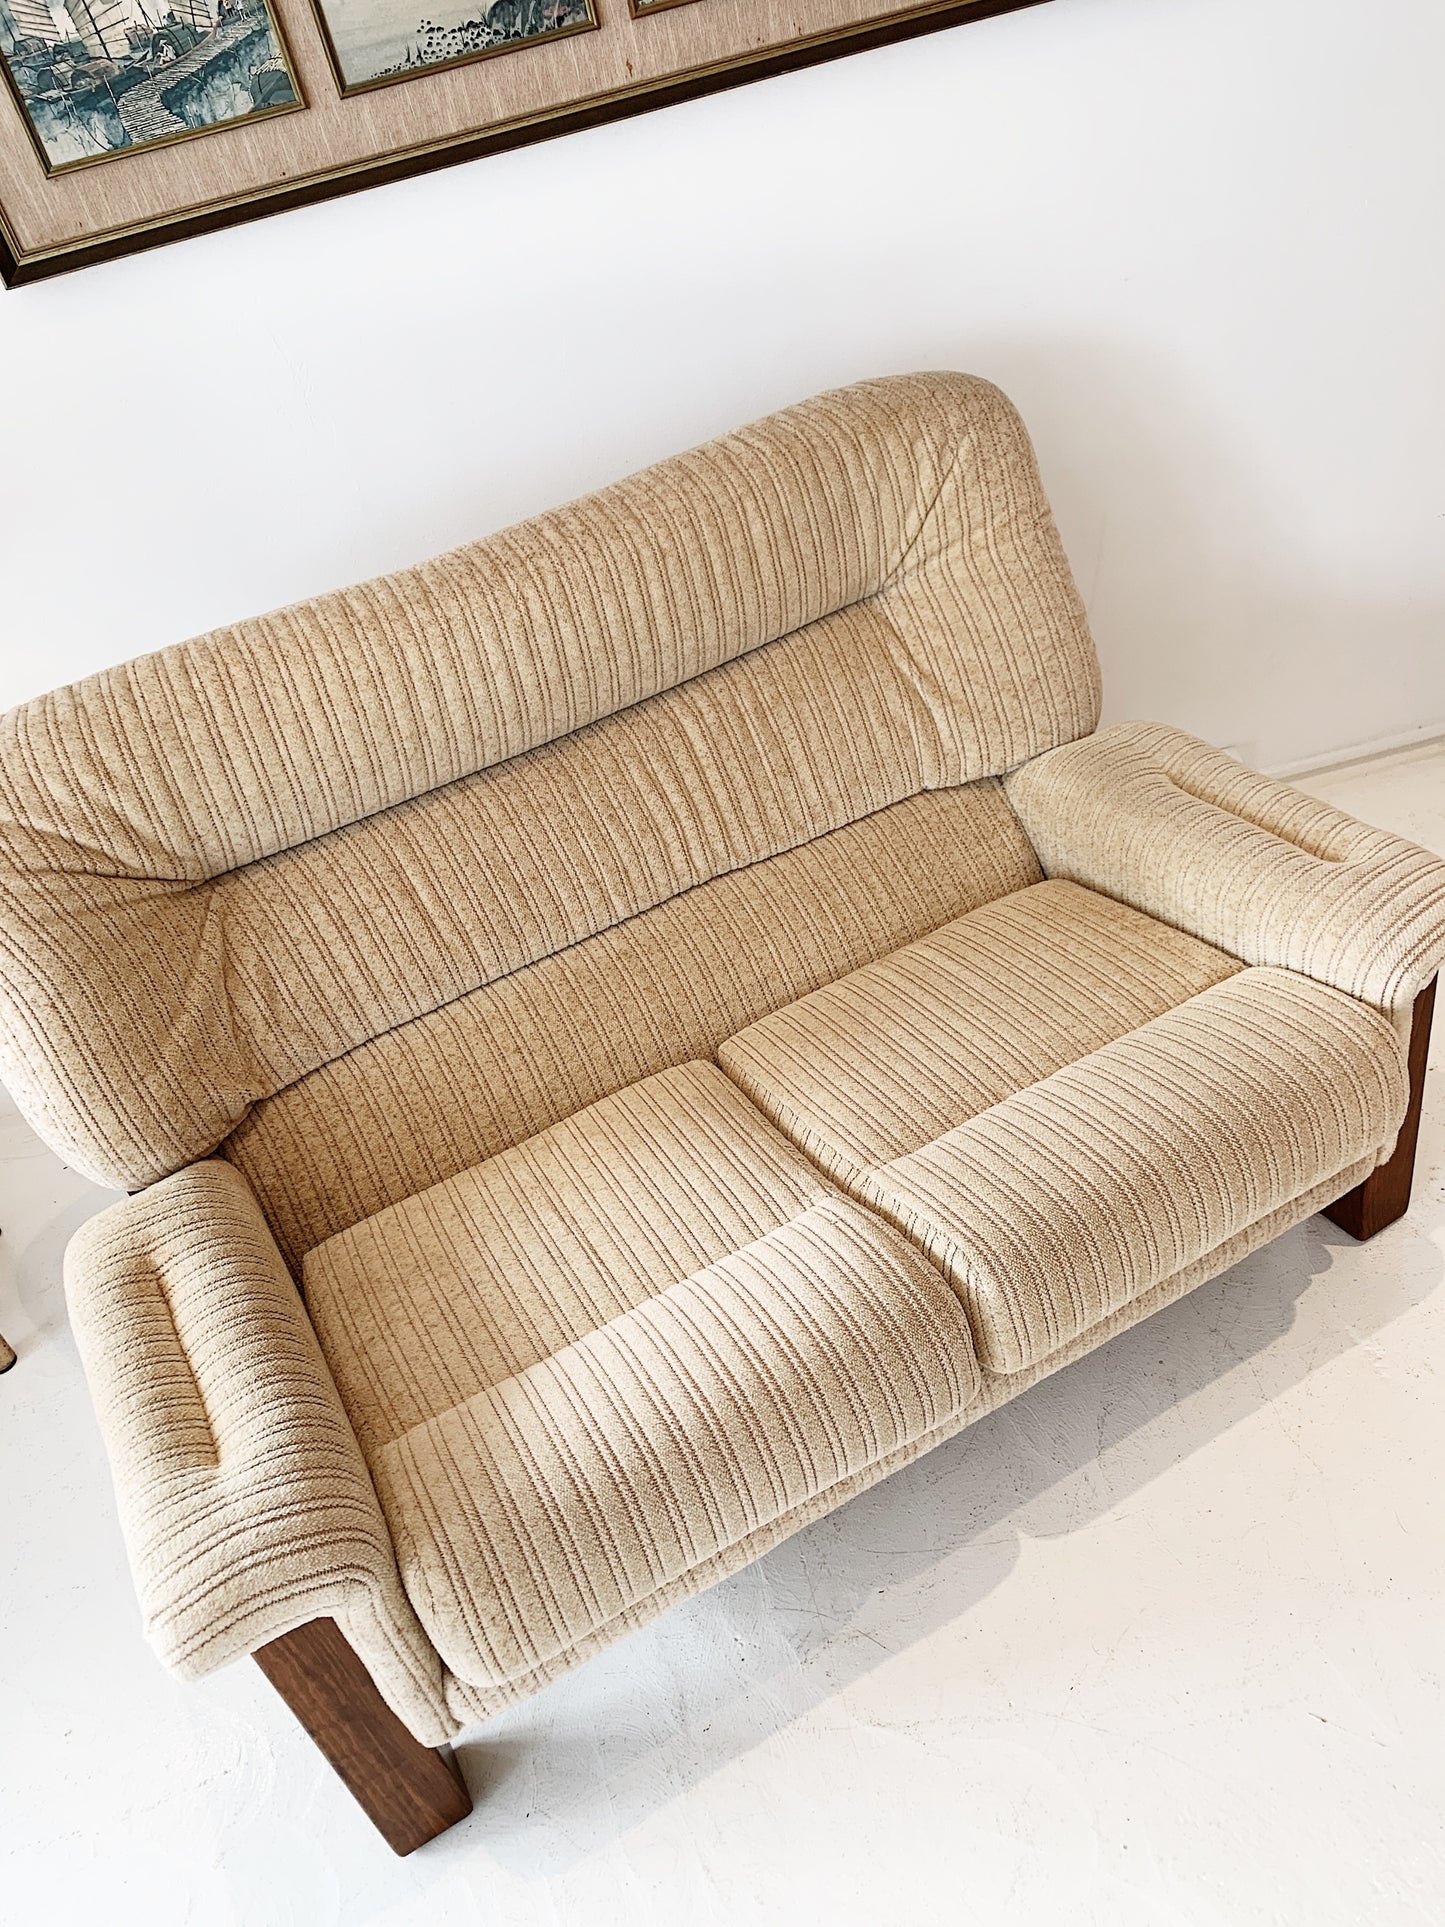 70s Miles Furniture Two Seater in "Snow Bird" Ribbed Velour